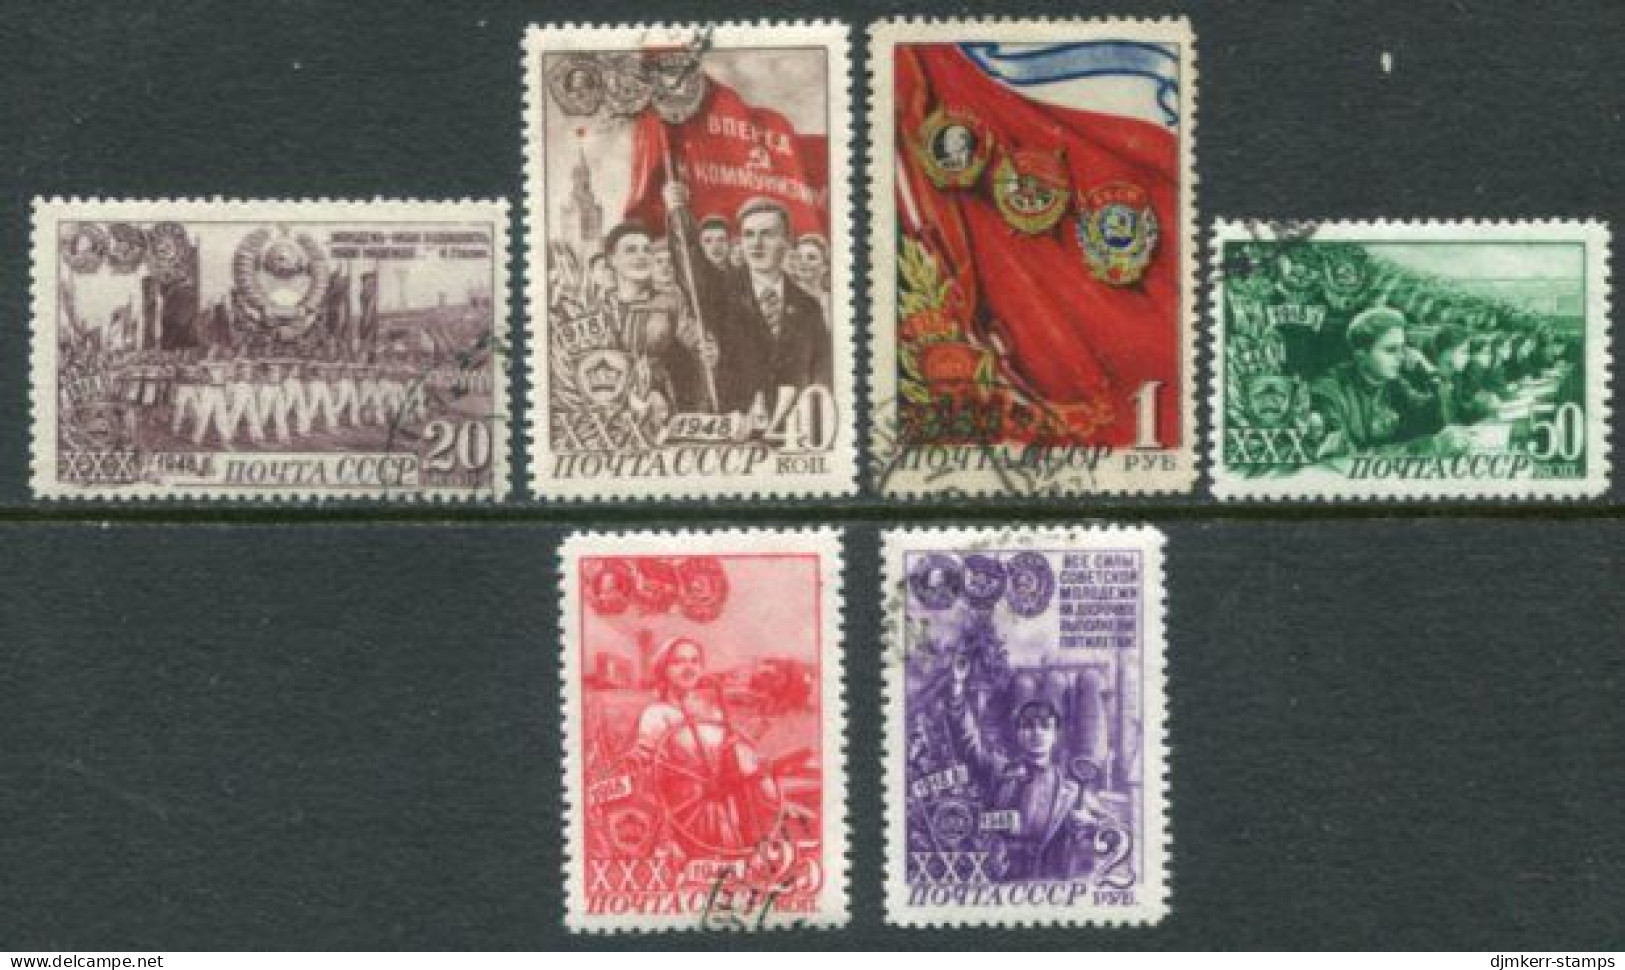 SOVIET UNION 1948 30th Anniversary Of Young Communist League Set Used.  Michel 1280-85 - Usados